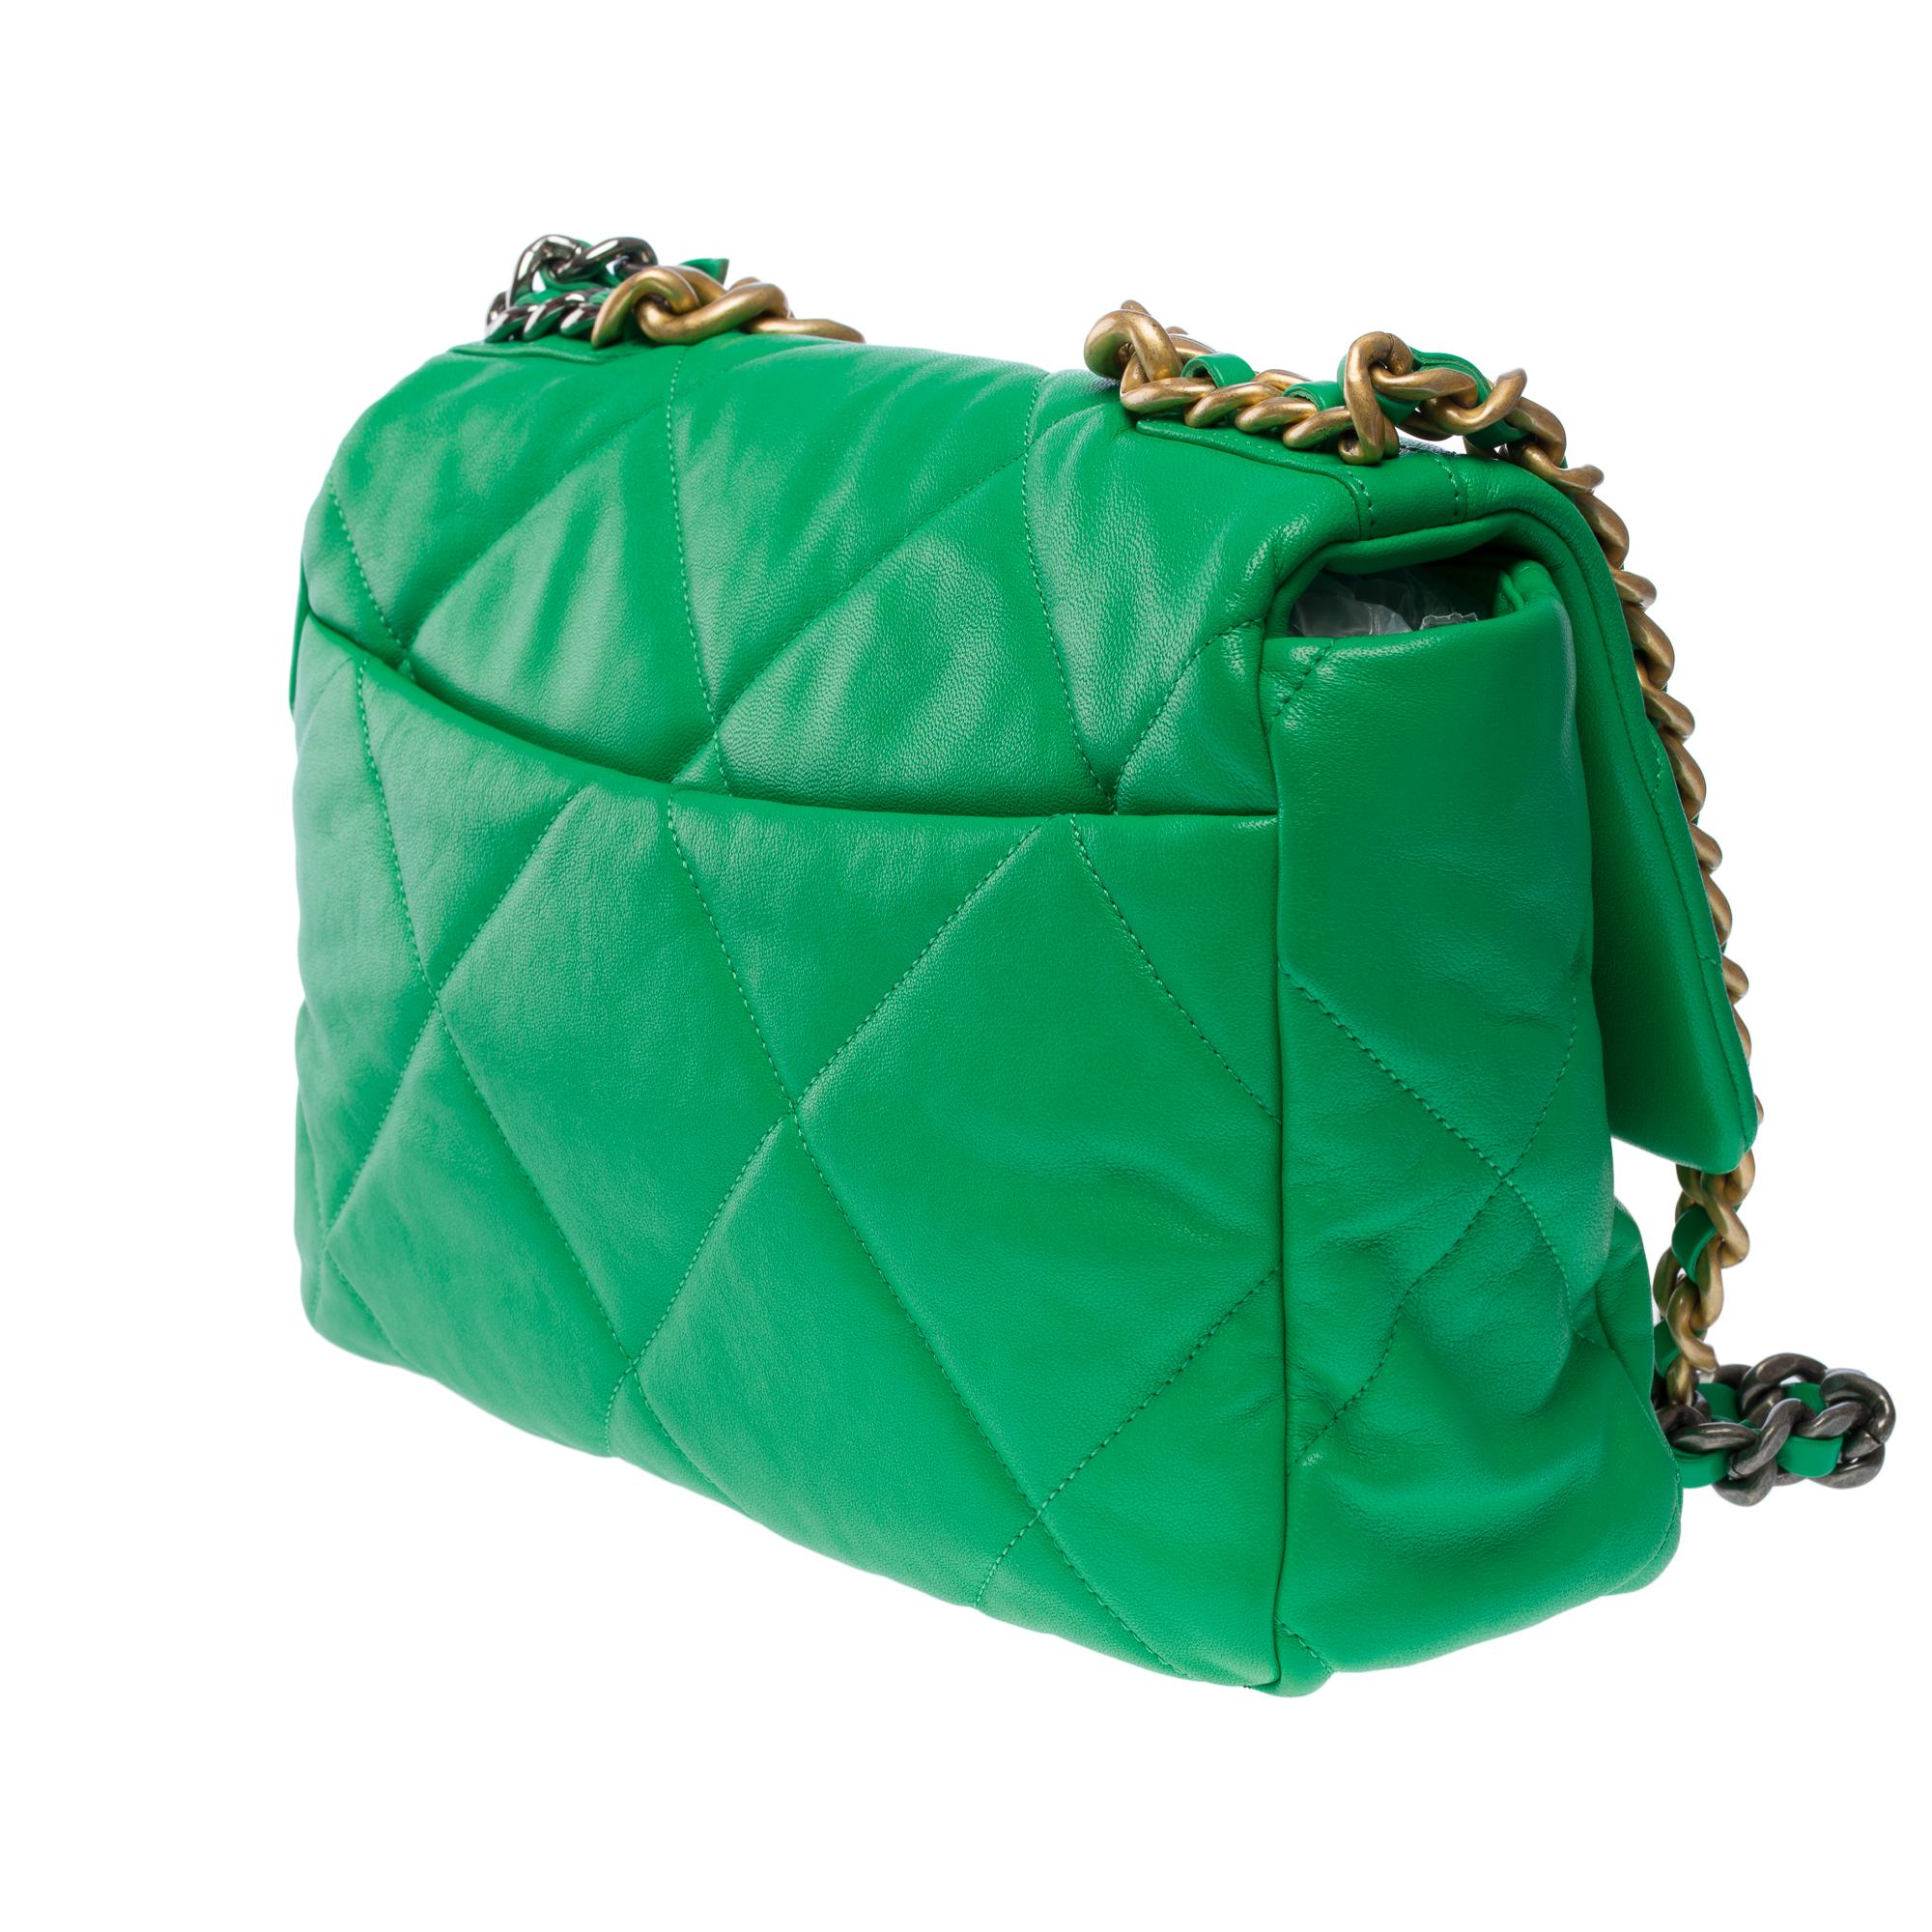 Women's Stunning Chanel 19 shoulder bag in Green quilted leather , Matt gold and SHW